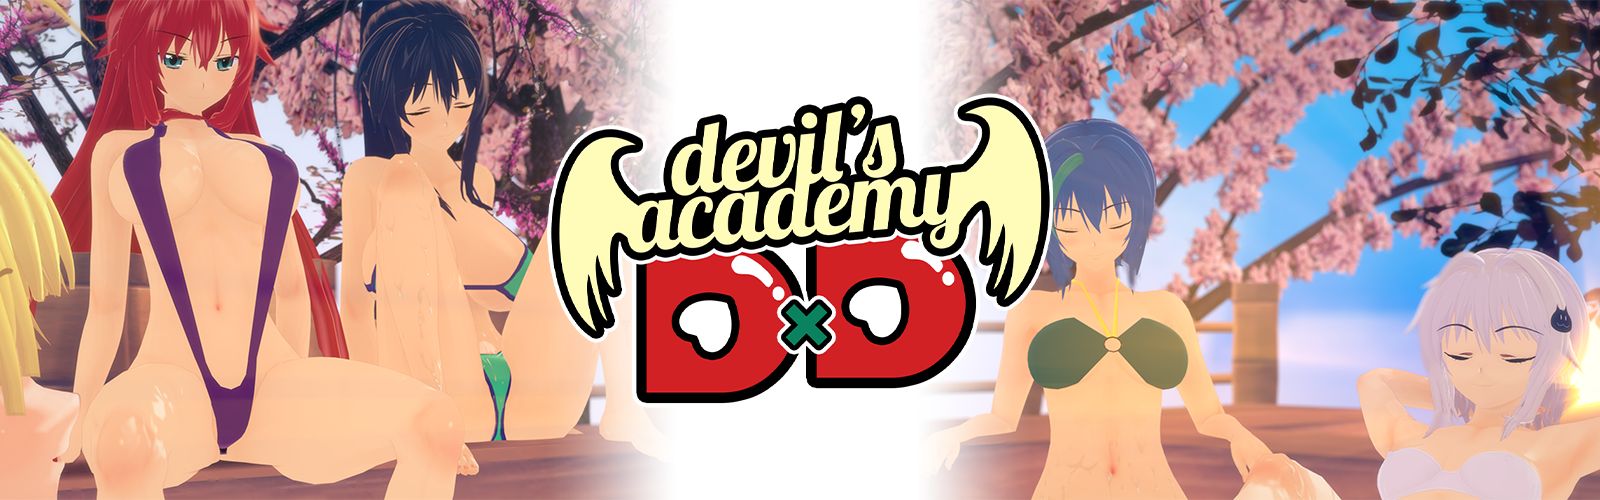 Devils Academy Dxd Apk Android Adult Game Download (8)